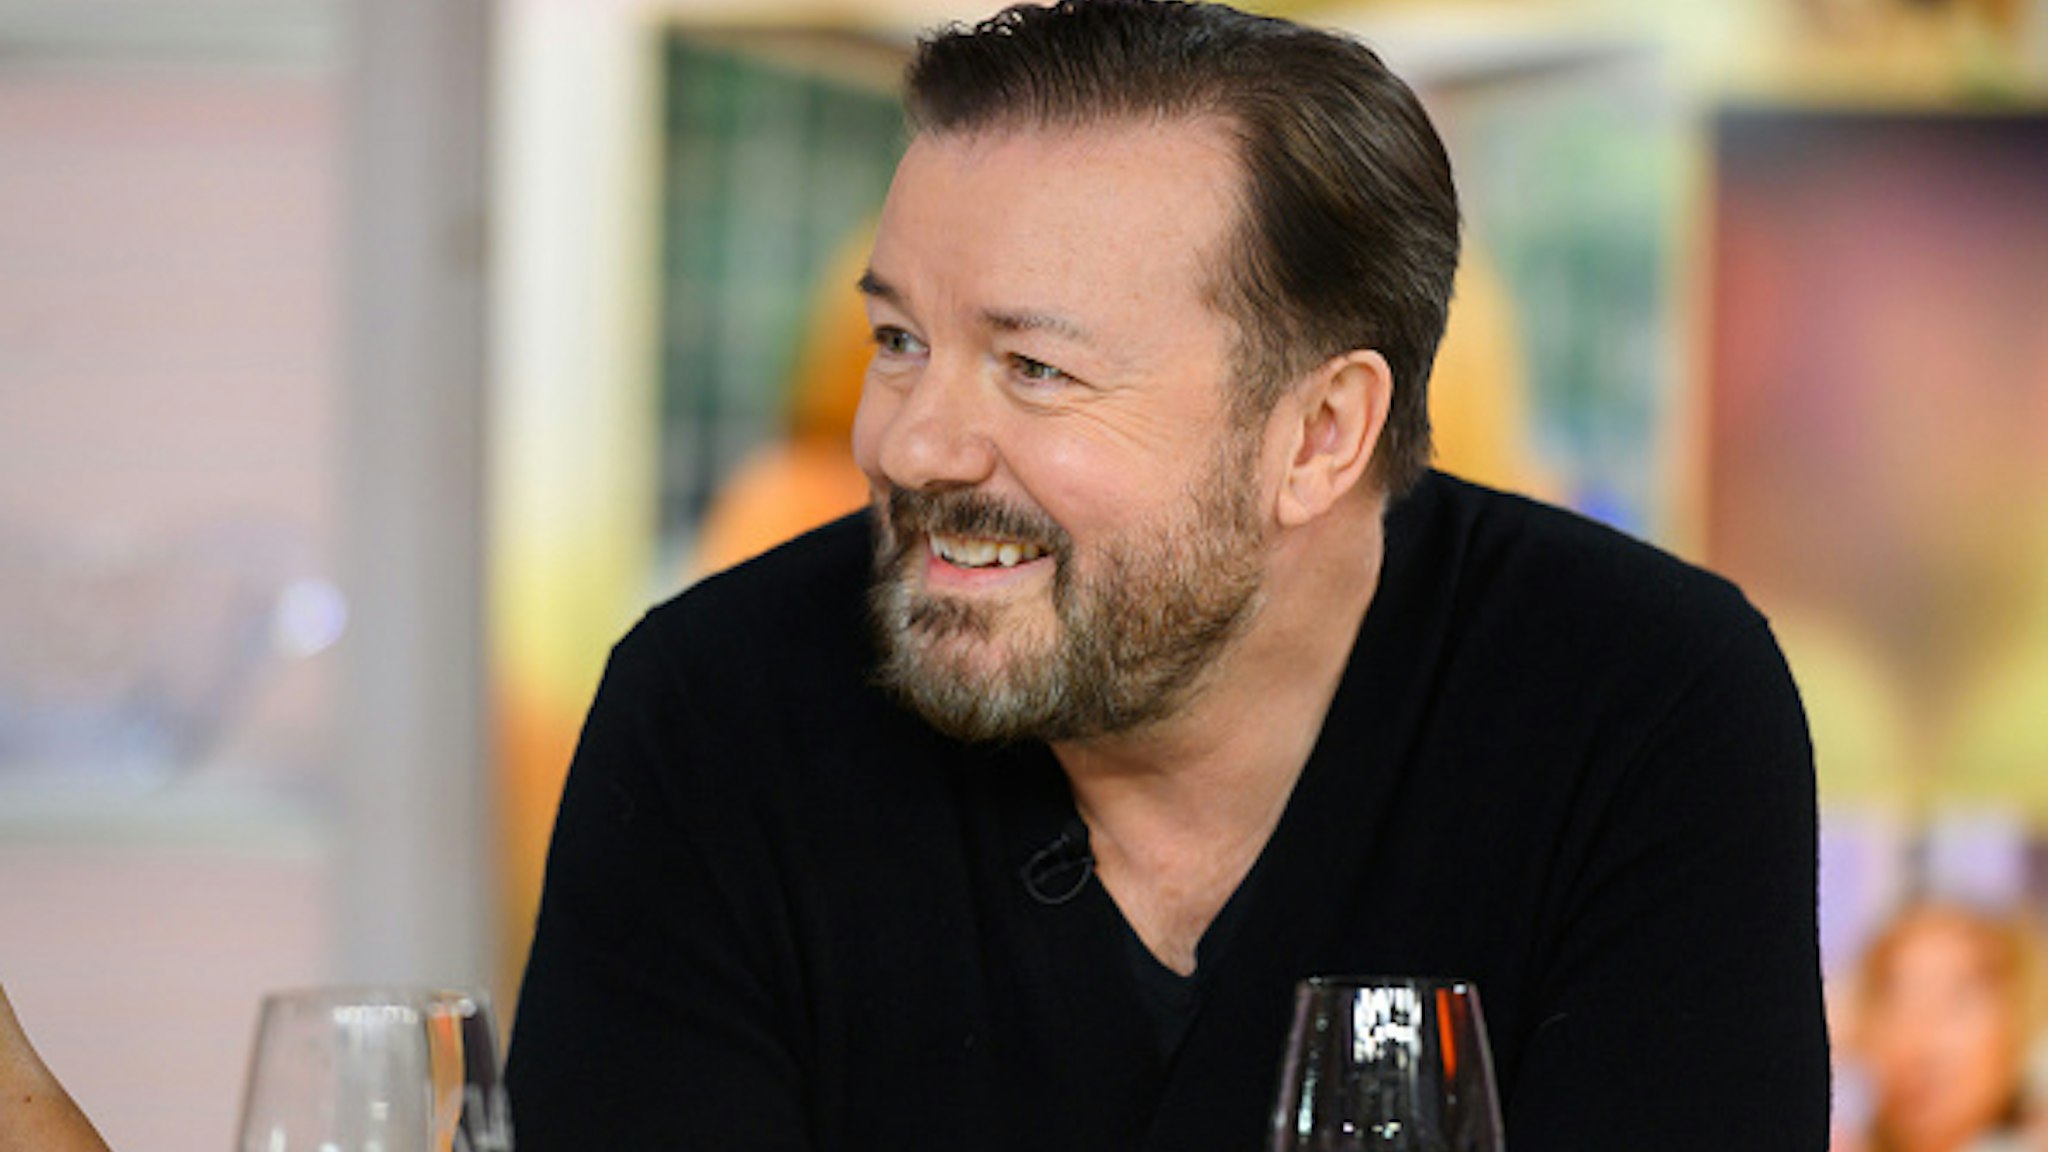 TODAY -- Pictured: Ricky Gervais on Tuesday, March 12, 2019